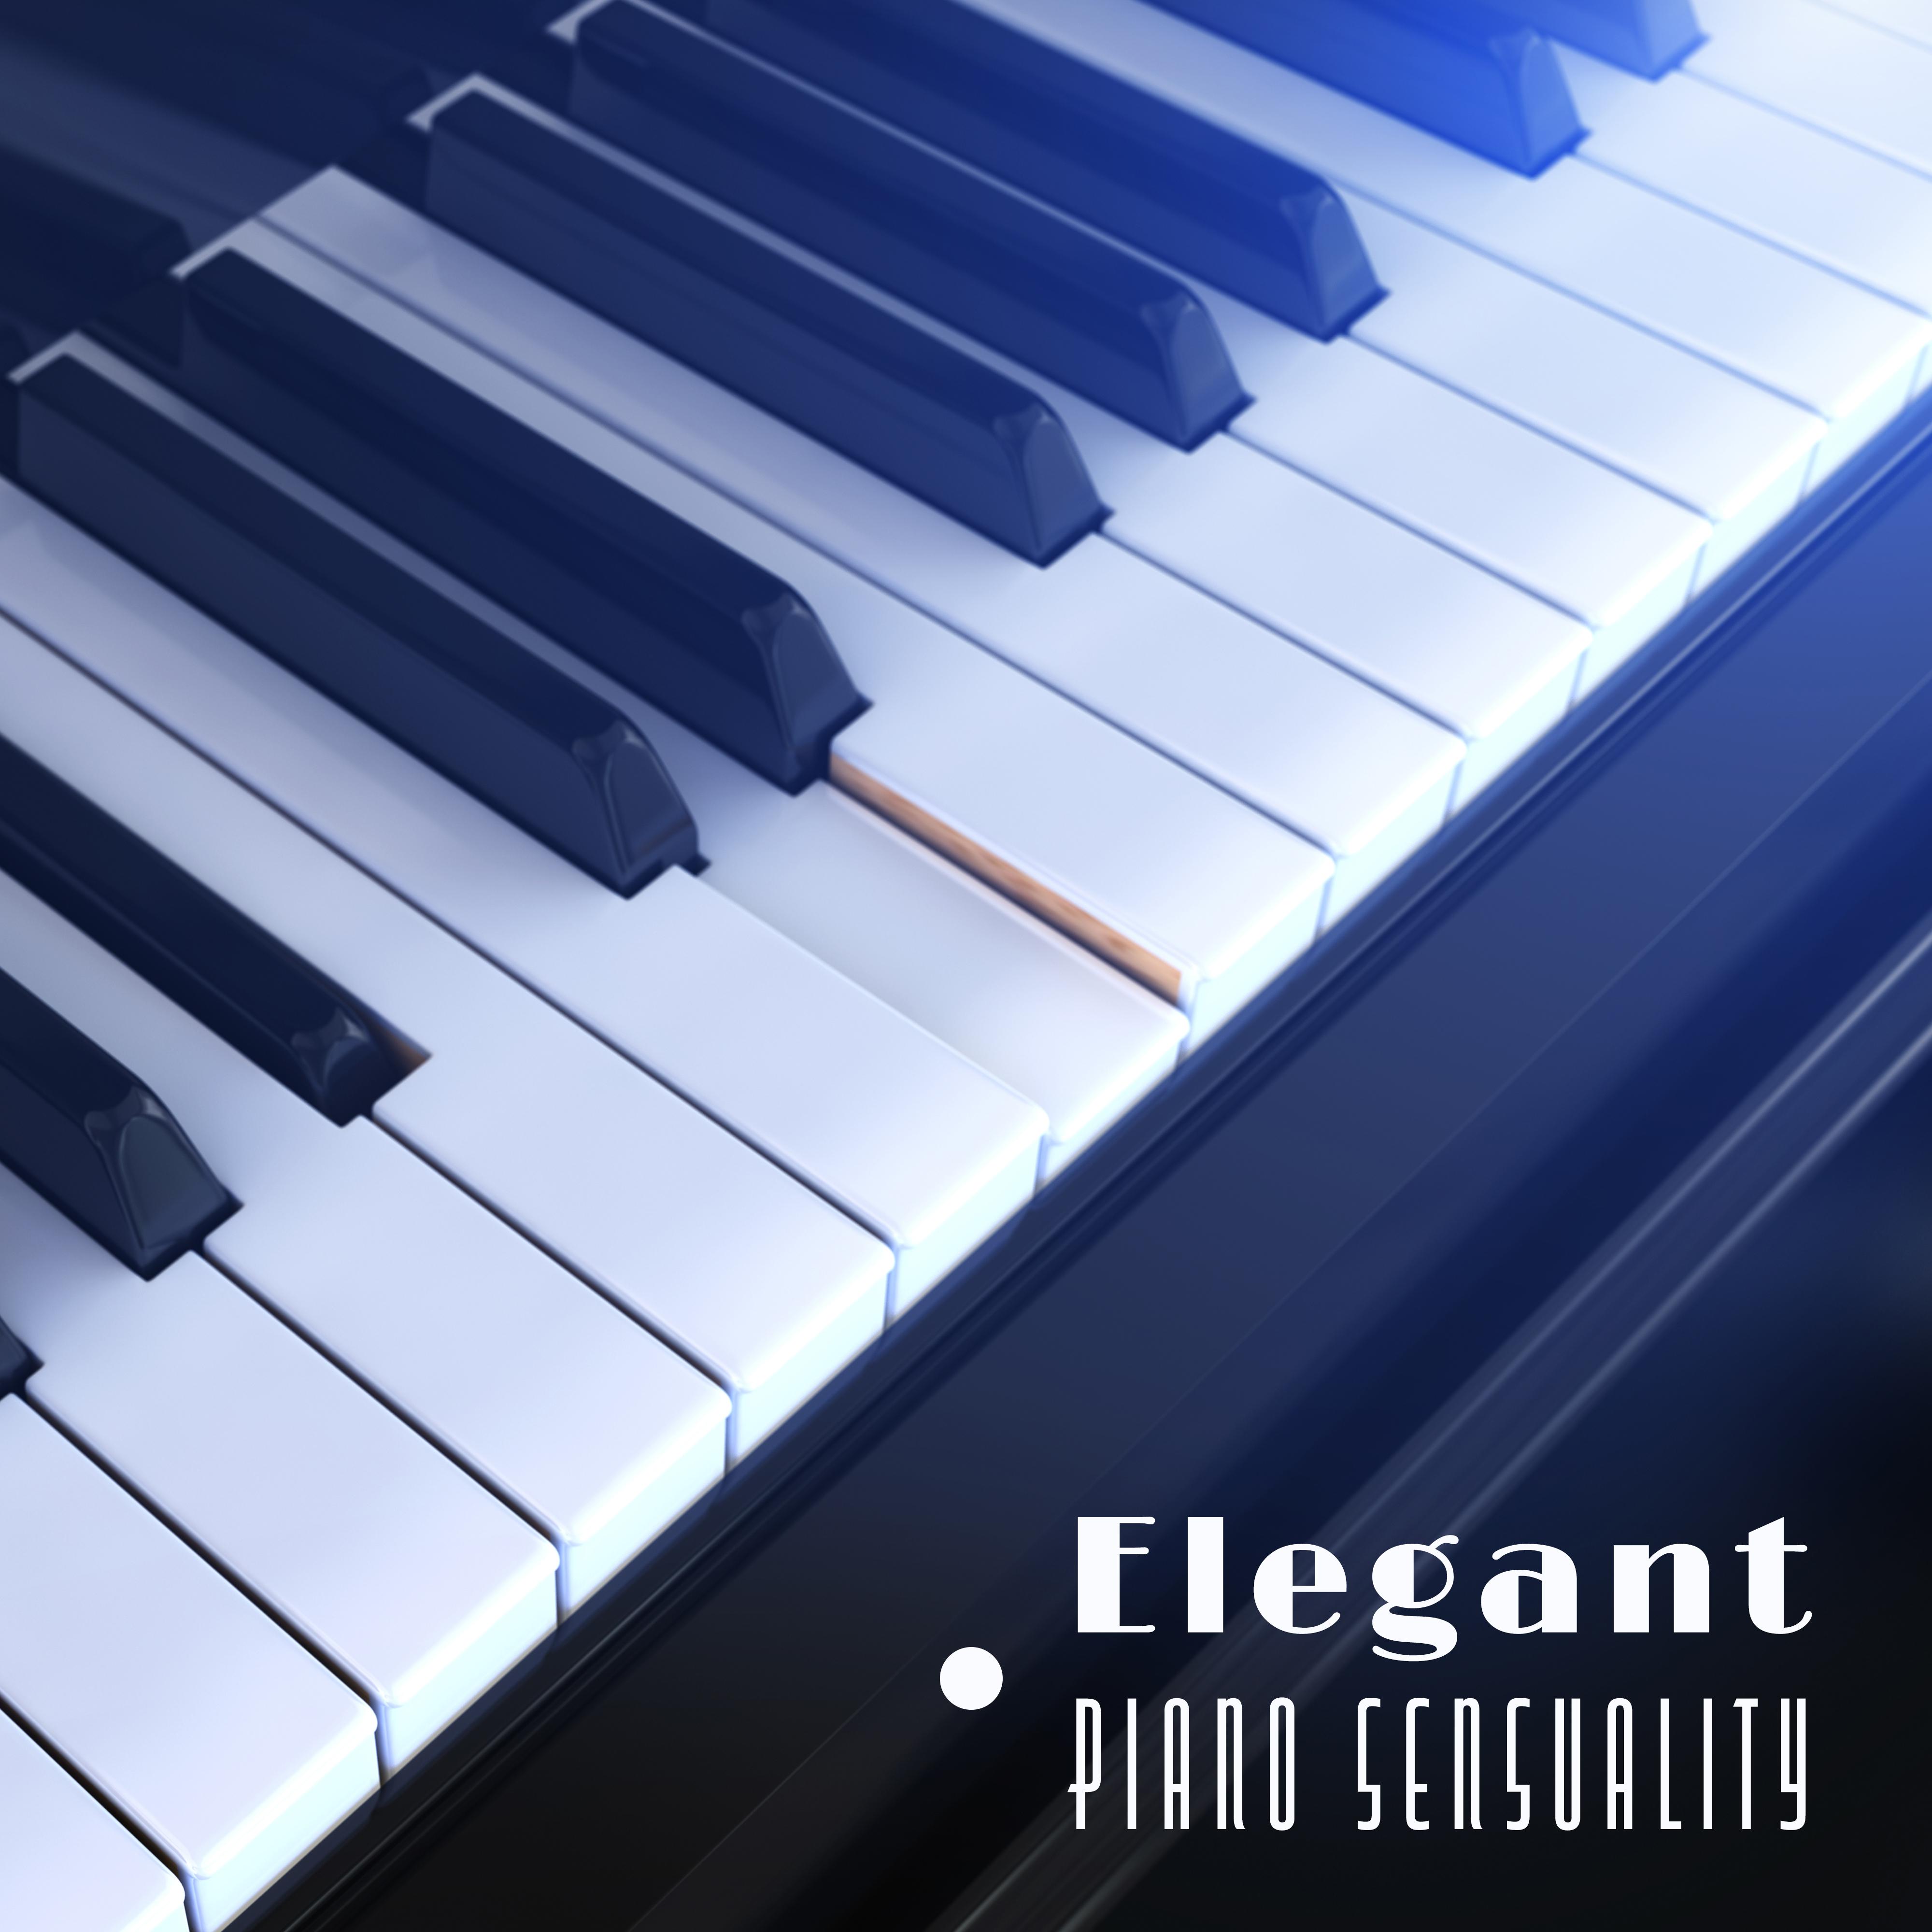 Elegant Piano Sensuality: Most Beautiful Piano Jazz Music in 2019, Sensual Melodies, Slow Smooth Songs for Couples, Dinner Background Sounds